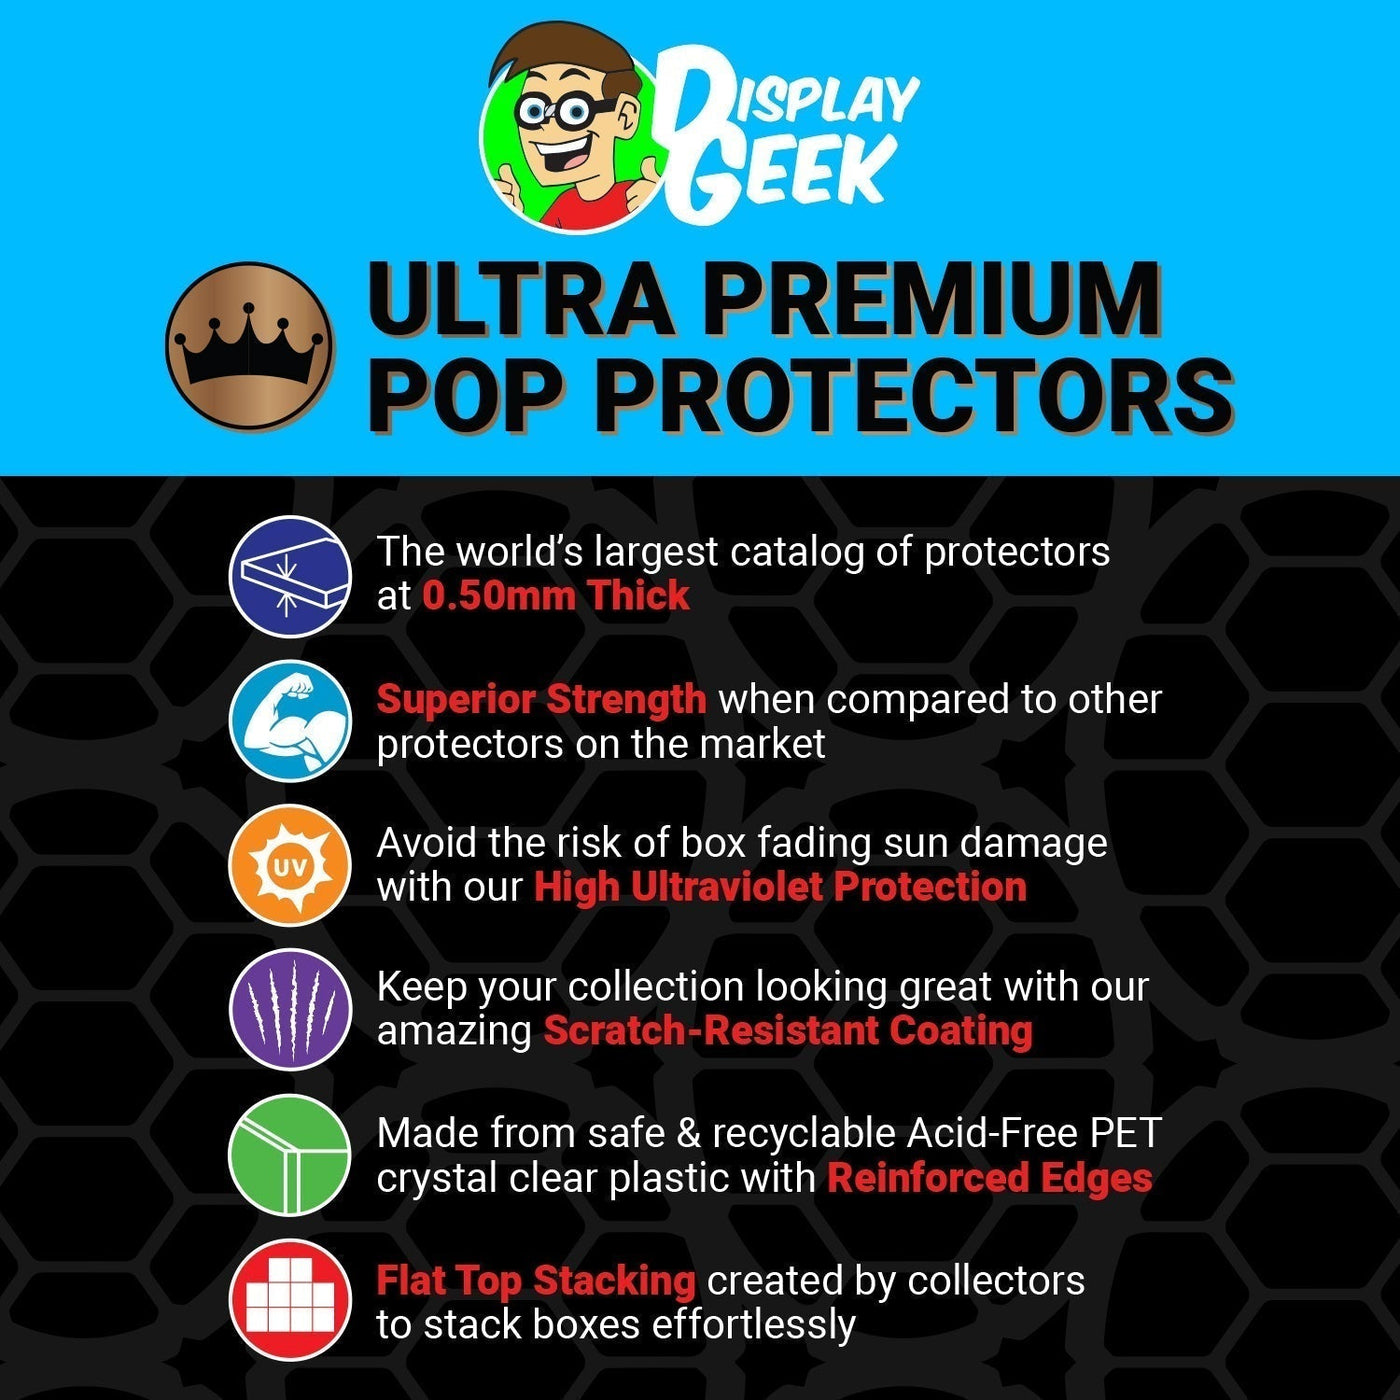 Pop Protector for One Piece Luffy with Going Merry NYCC #111 Funko Pop Rides on The Protector Guide App by Display Geek